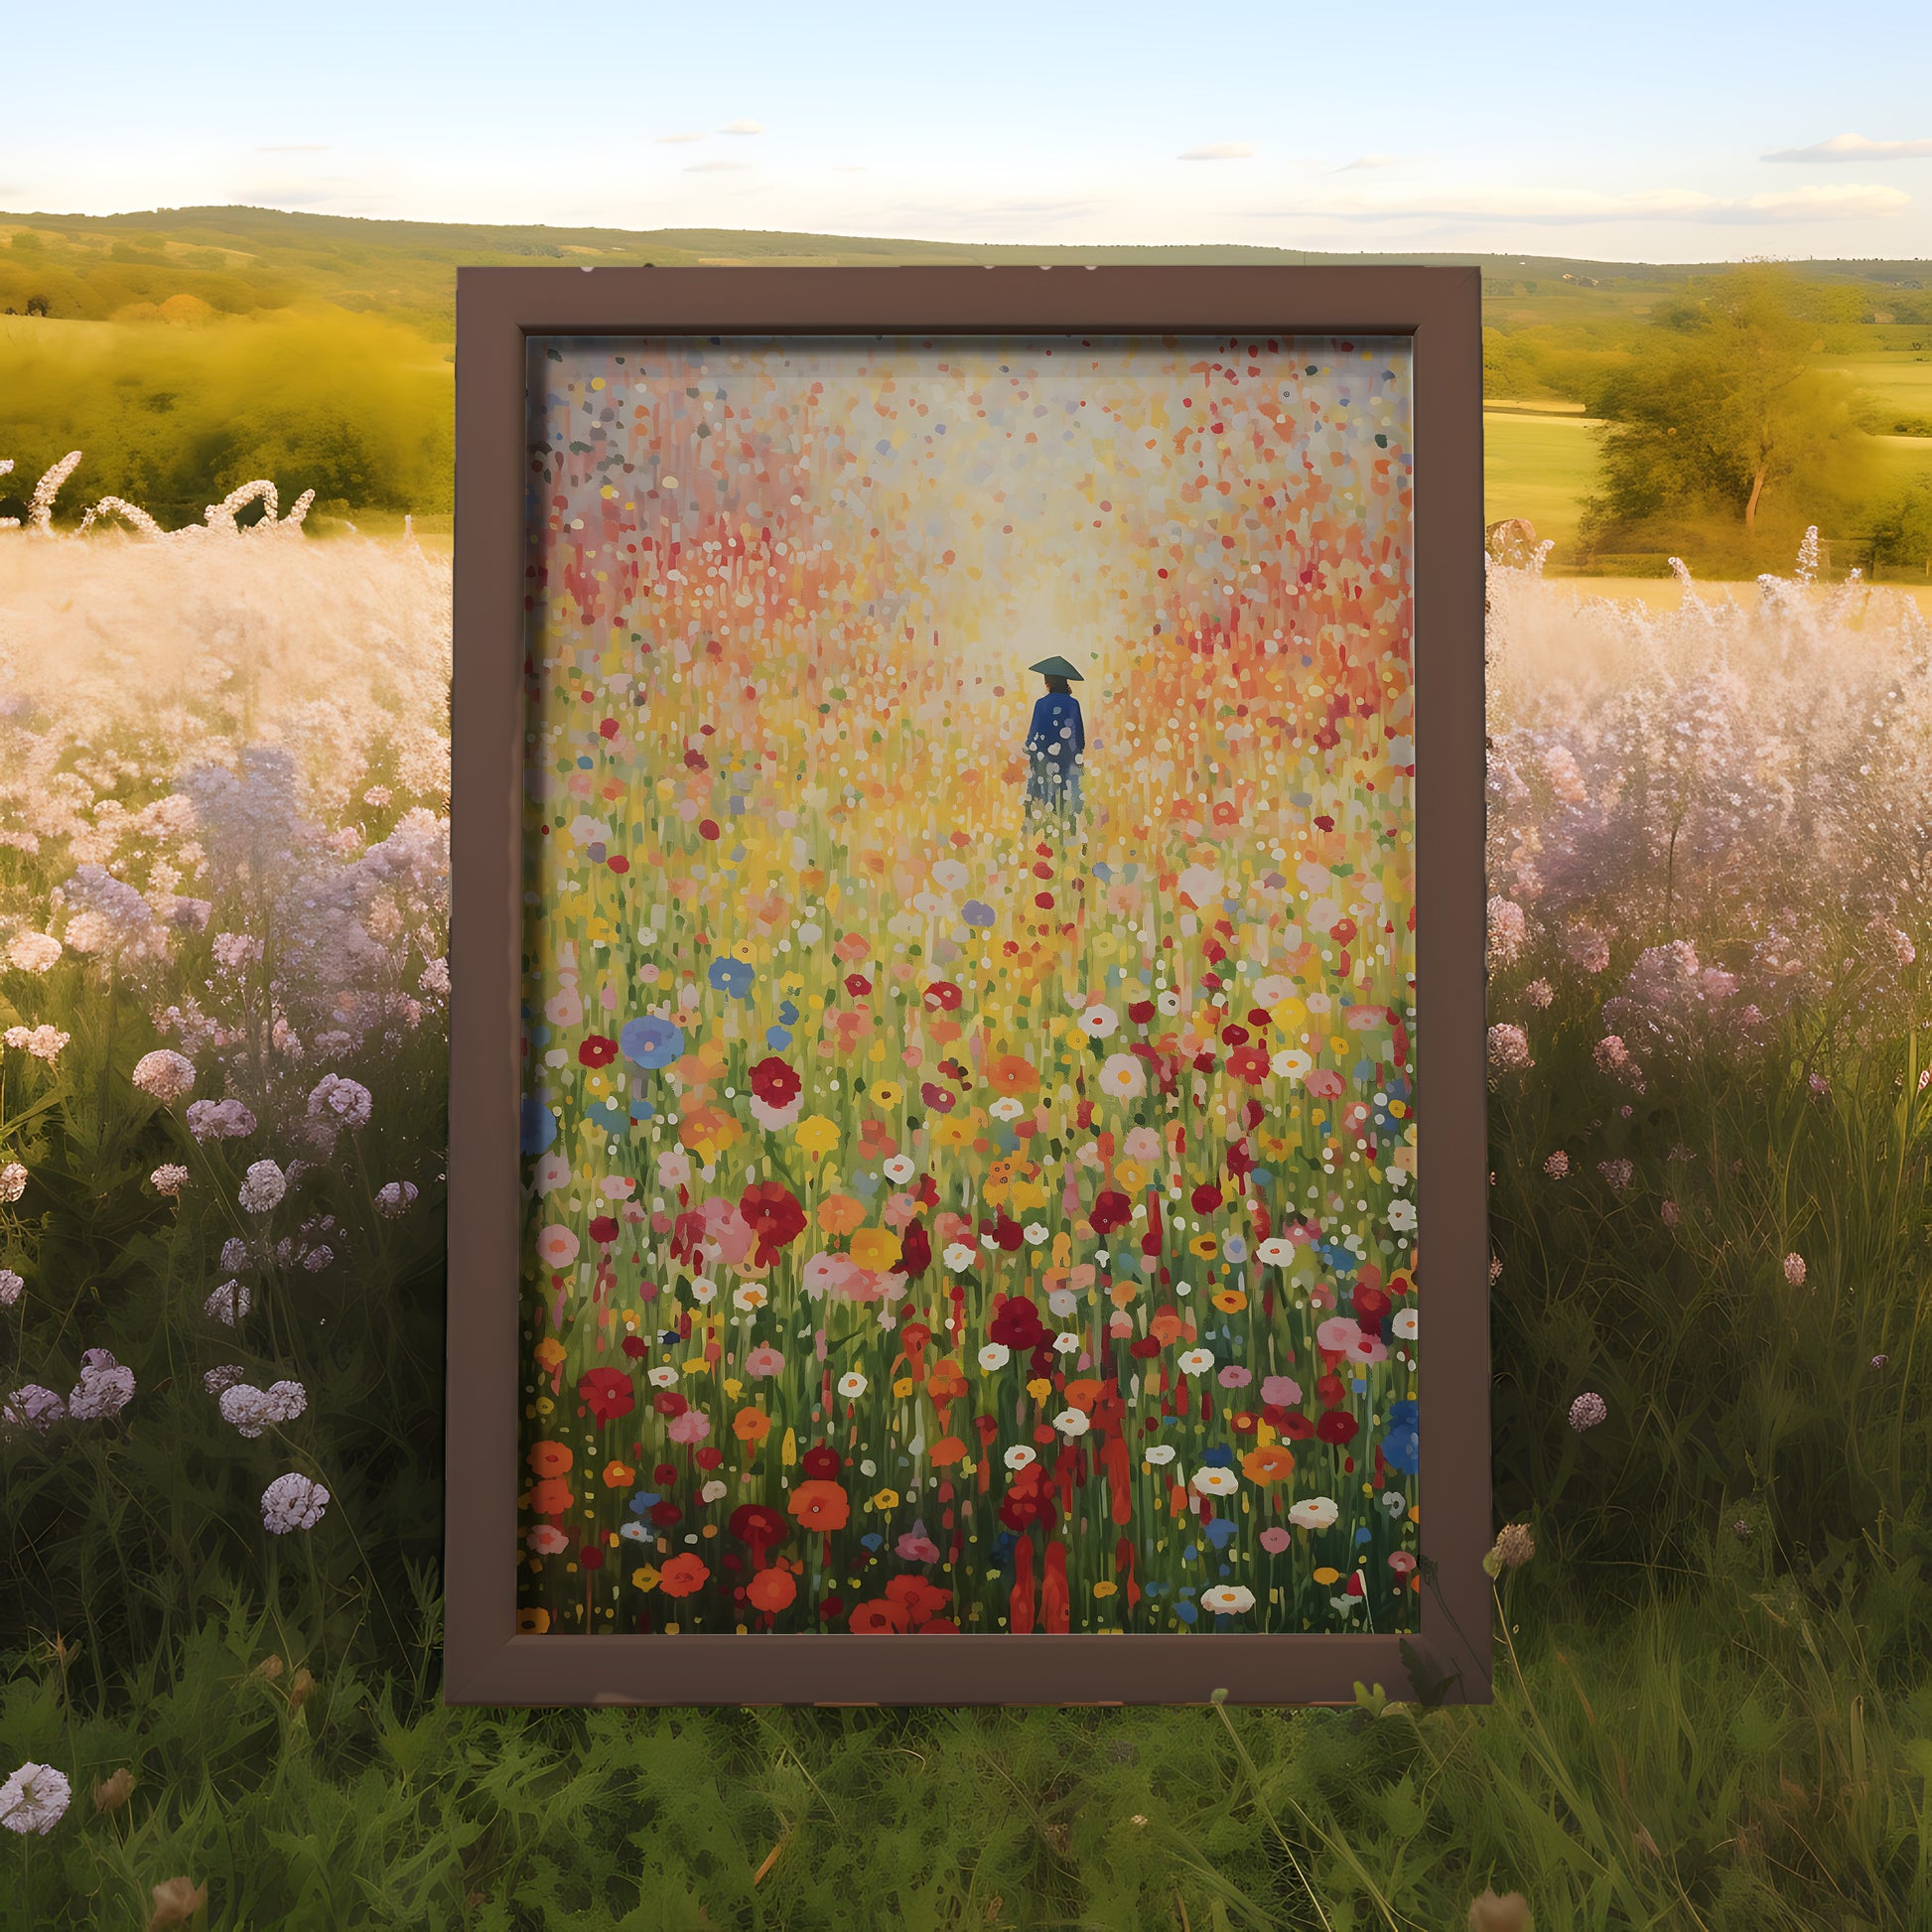 A vibrant painting of a colorful flower field with a blue bird, set against a real-life meadow backdrop.